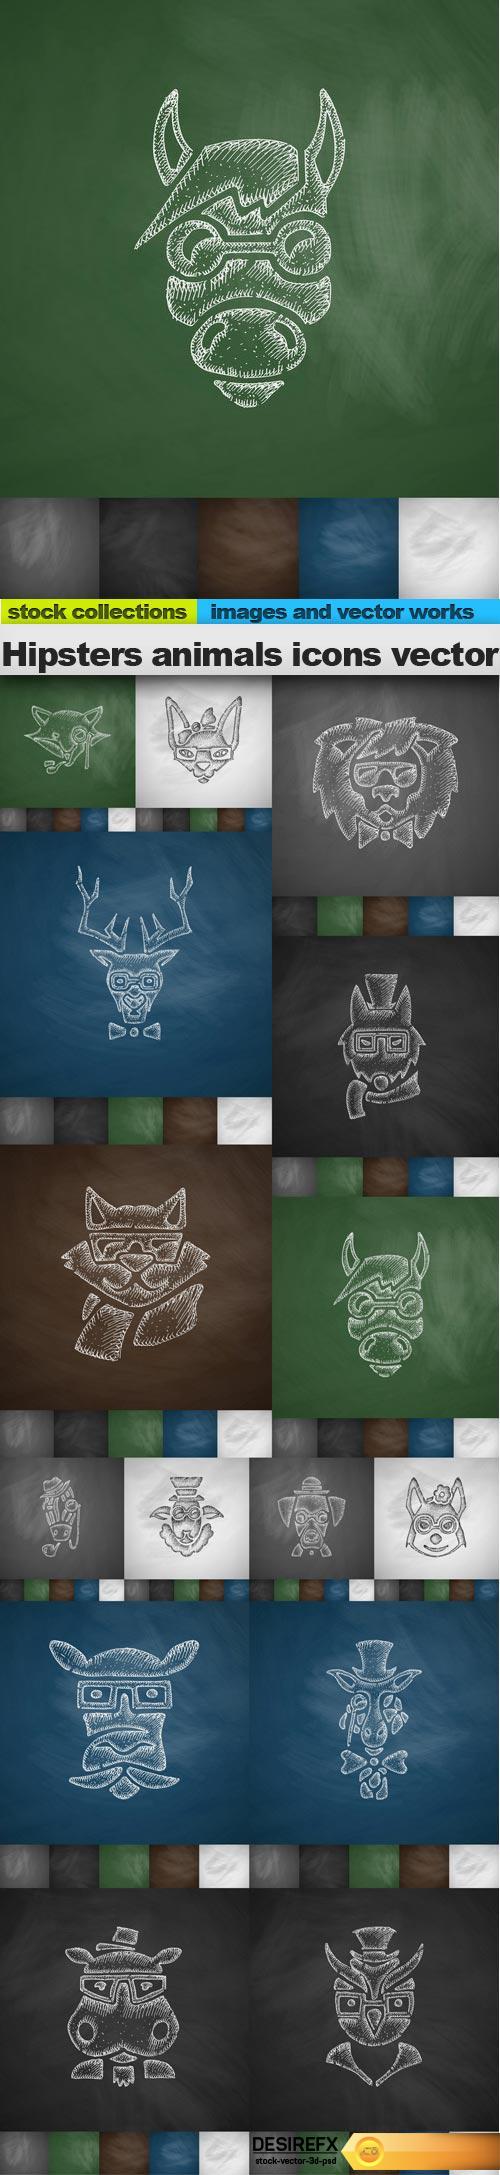 Hipsters animals icons vector, 15 x EPS